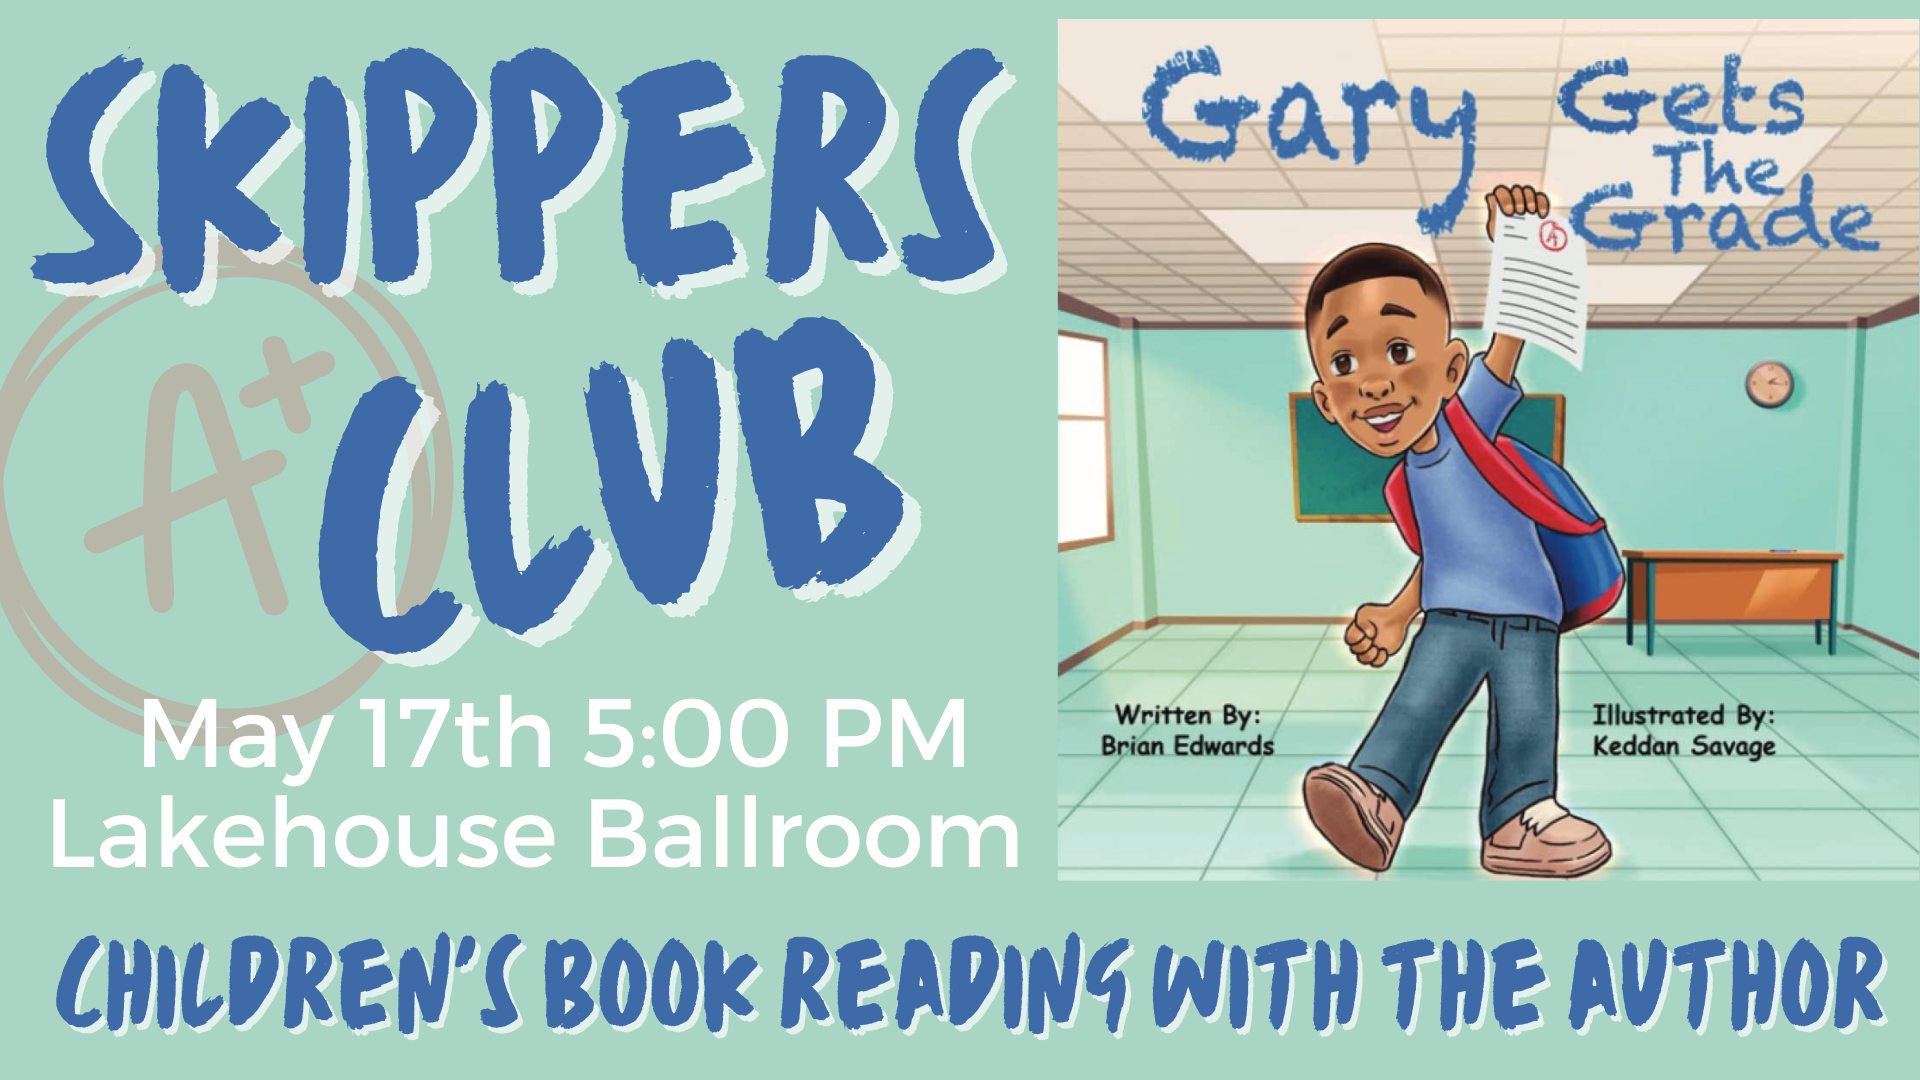 Skippers Club Children's Book Reading - May 17th